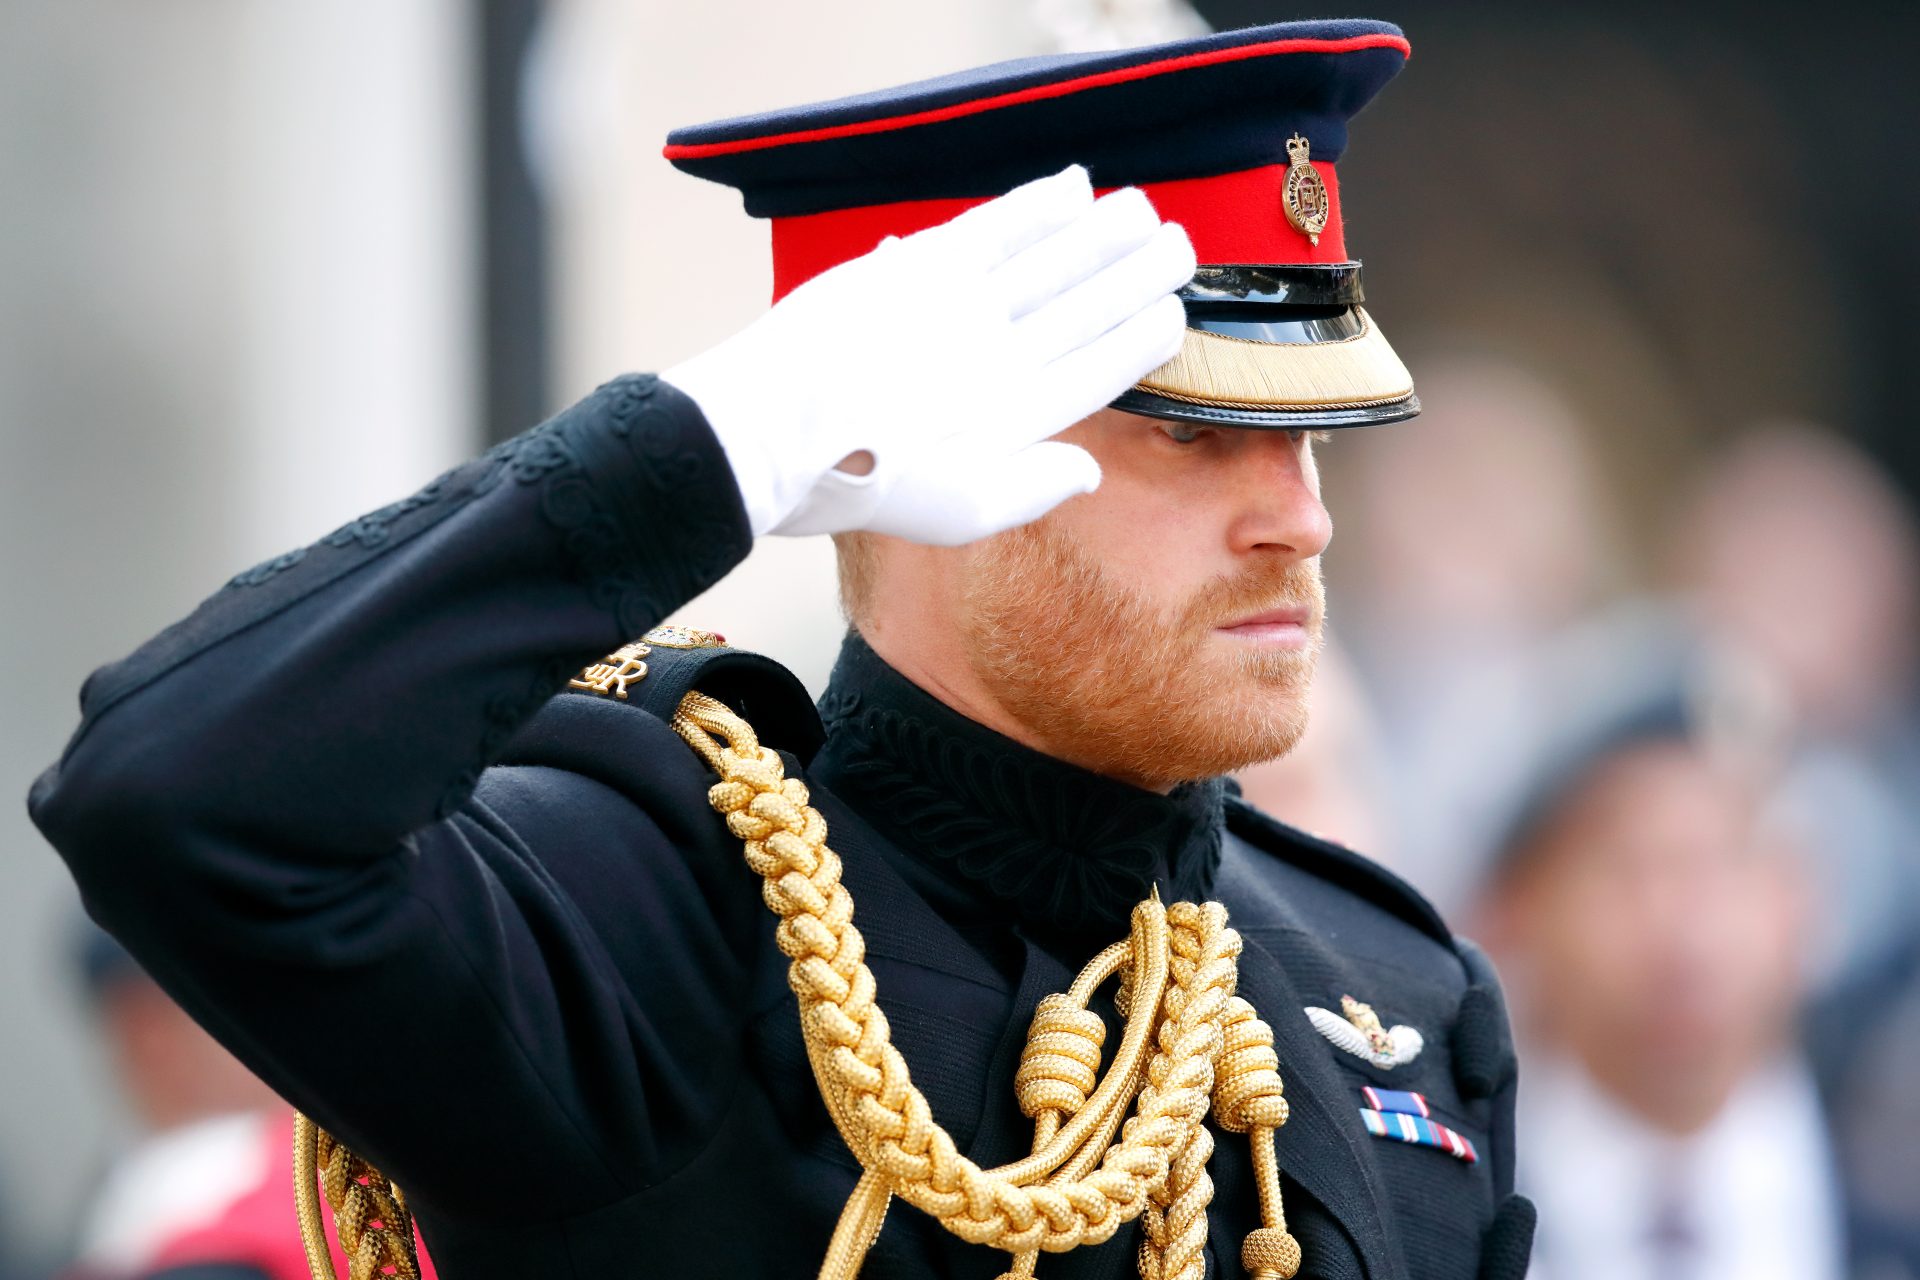 Prince Harry: the forgotten hero? A look at the Duke of Sussex's military career